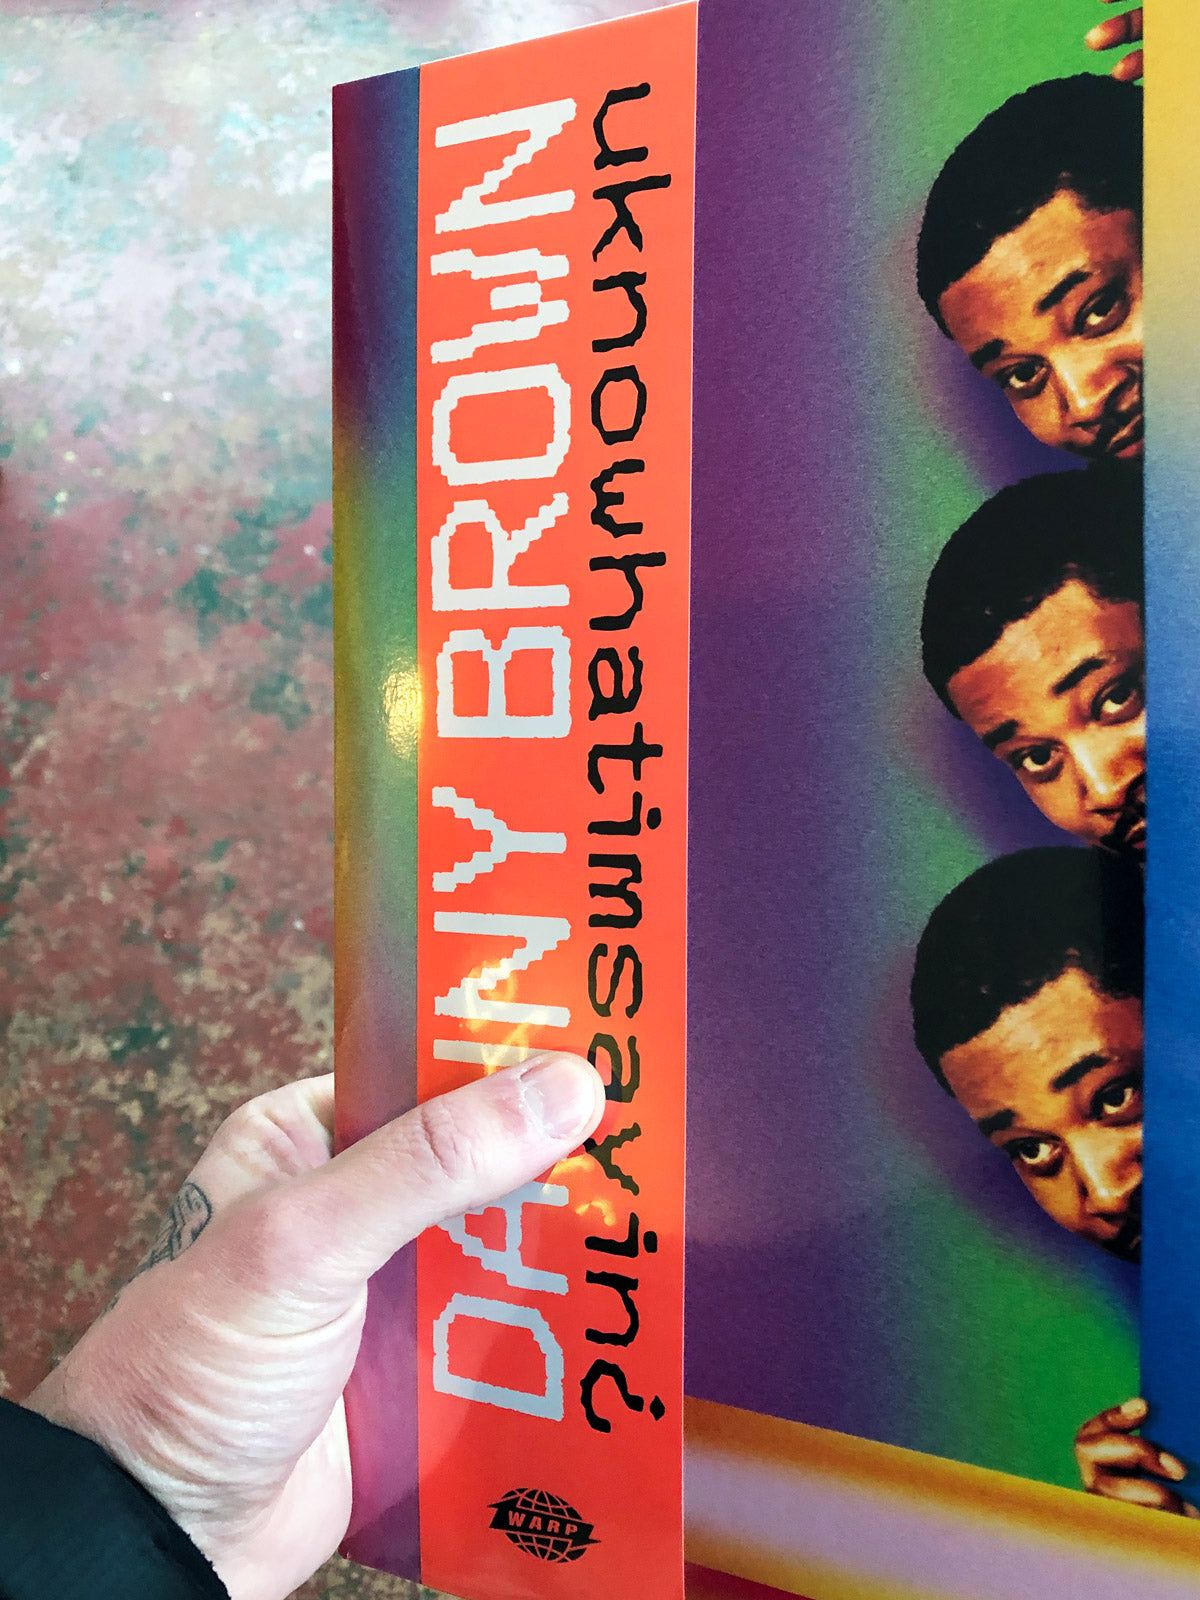 ROTW: Danny Brown, Anne Müller, Beck, Girl Ray and Richard Fearless.